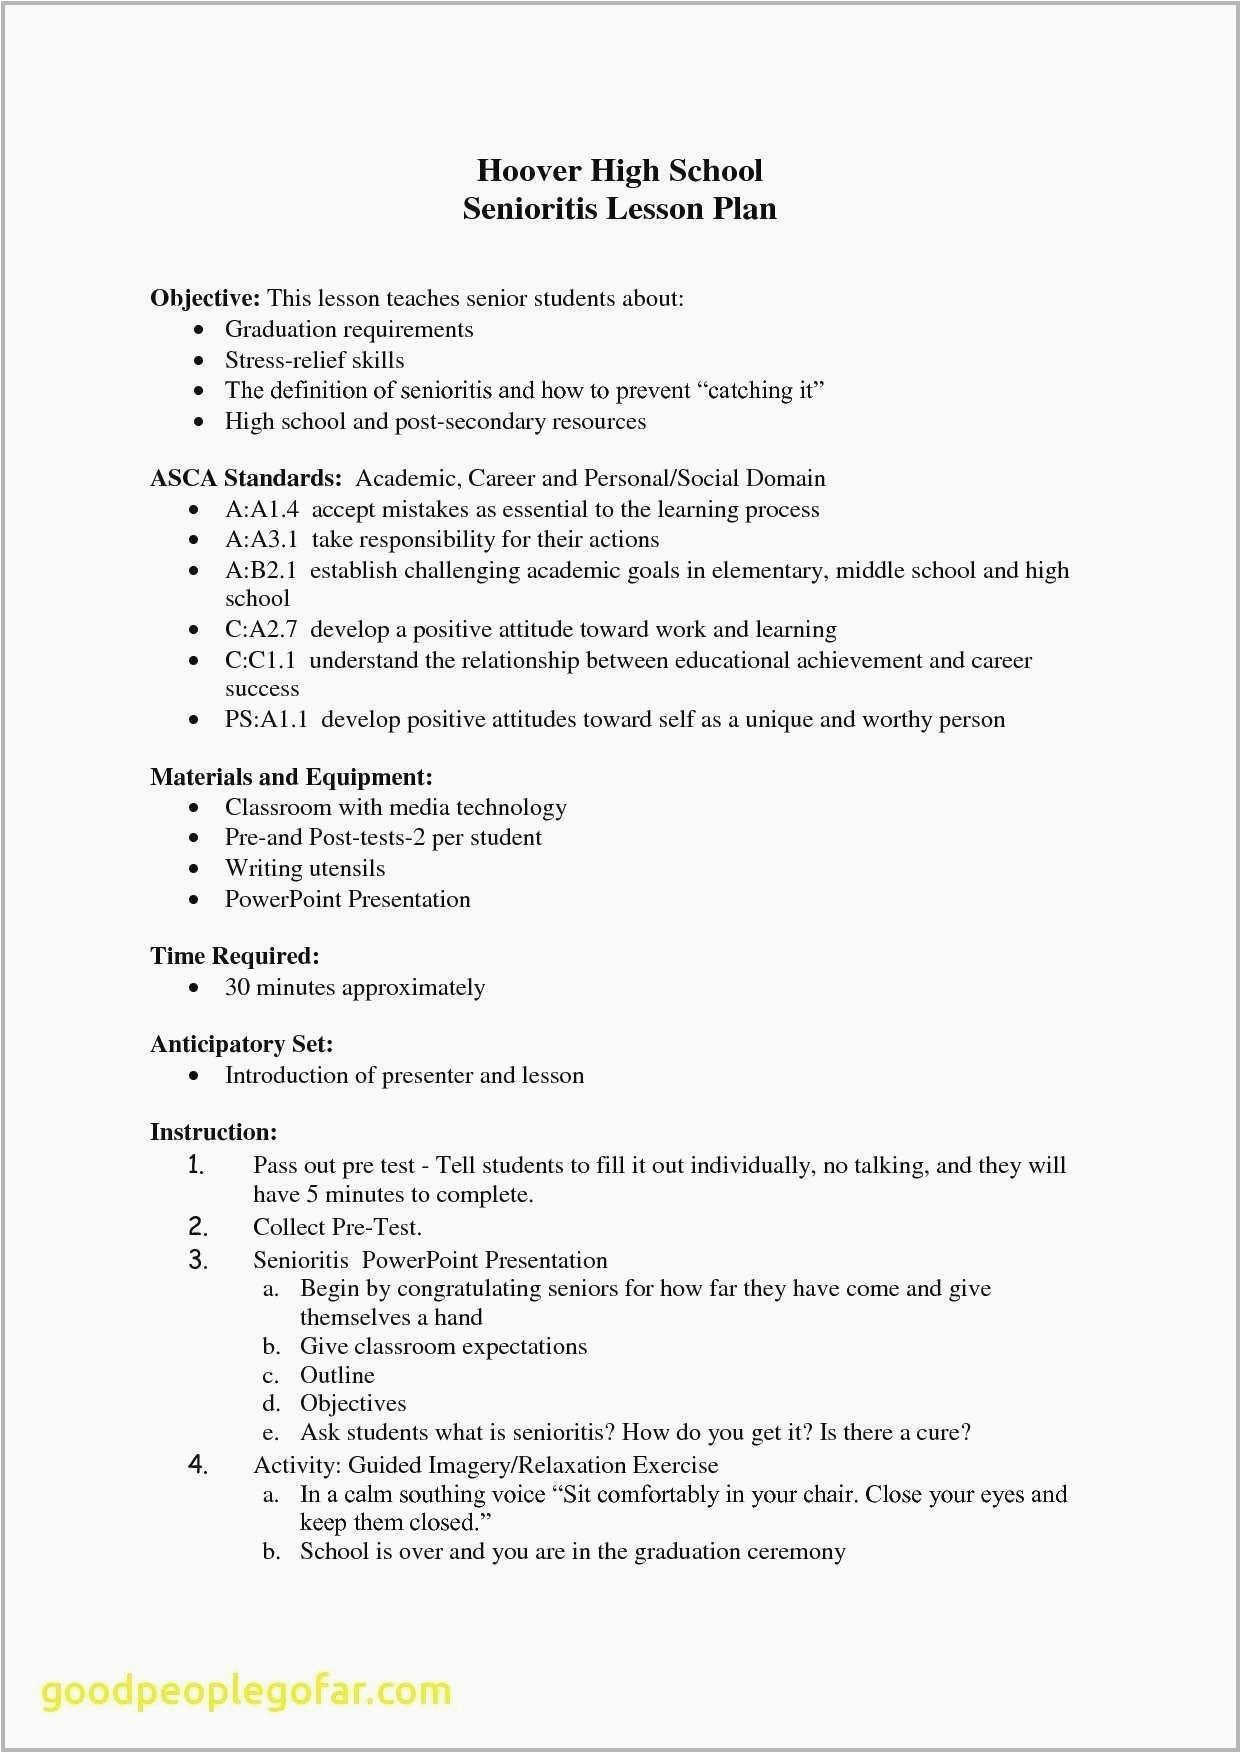 Resume Objective Sample for High School Graduate High School Graduate Resume Template Download – Resume